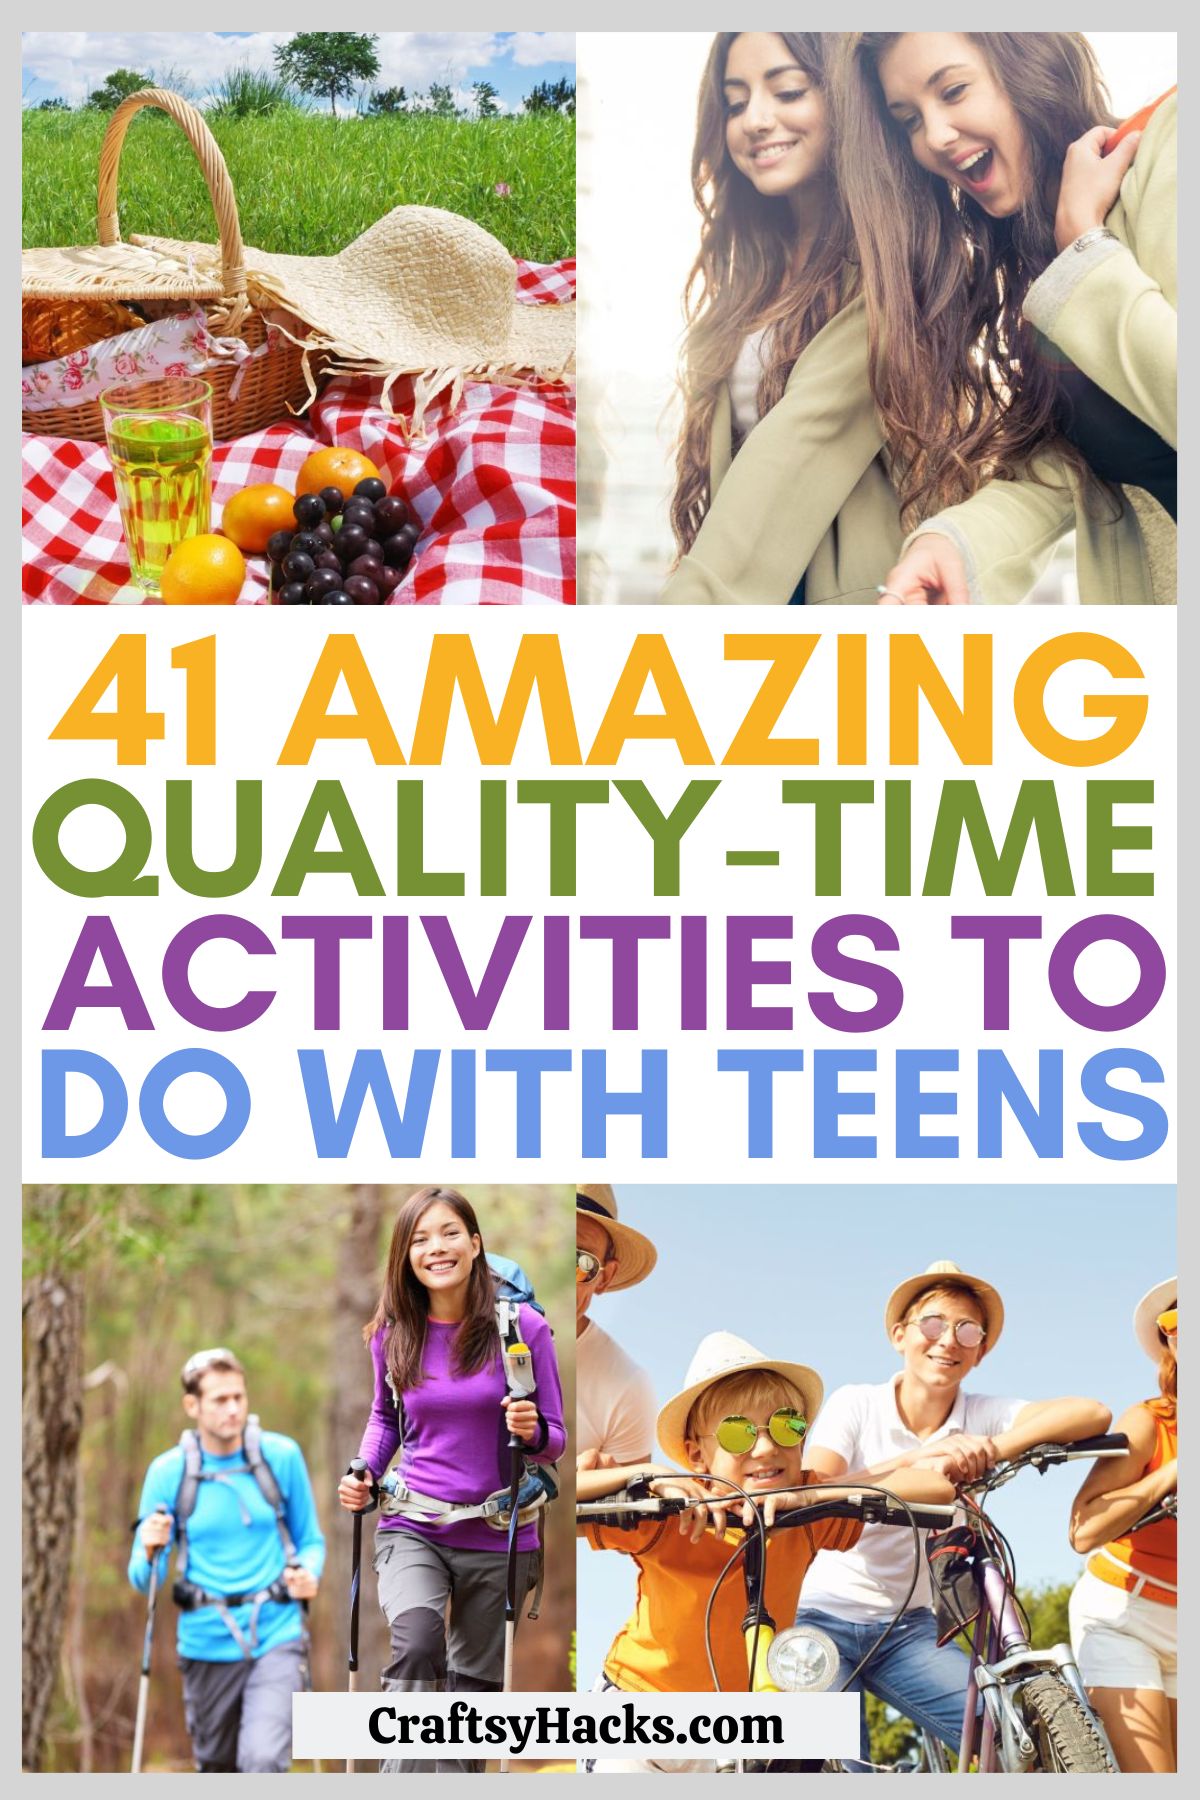 quality-time activity ideas to do with teenagers